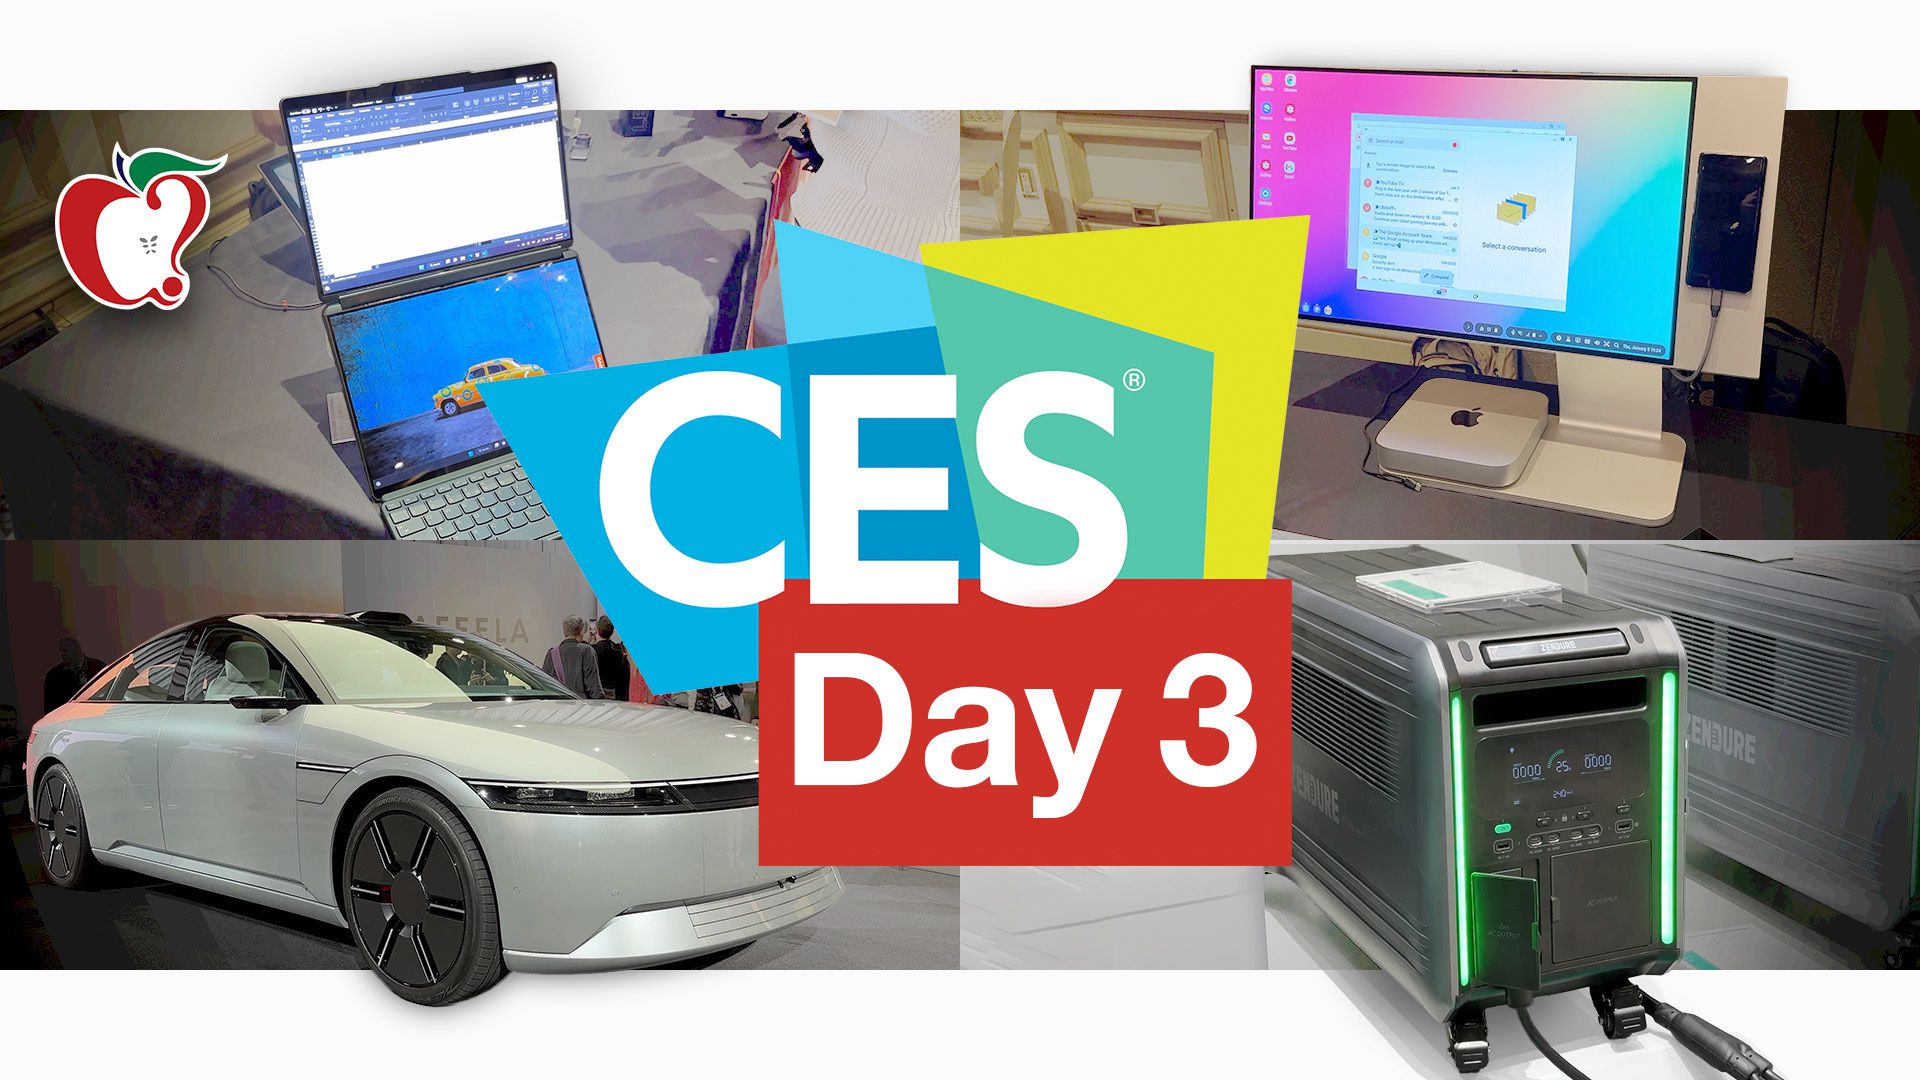 Day 3 CES Video Roundup: Chargers From Hyper and Zendure, Lenovo's iPad Pro-Like Tablet and Multi-Display Laptop, Plus More - macrumors.com